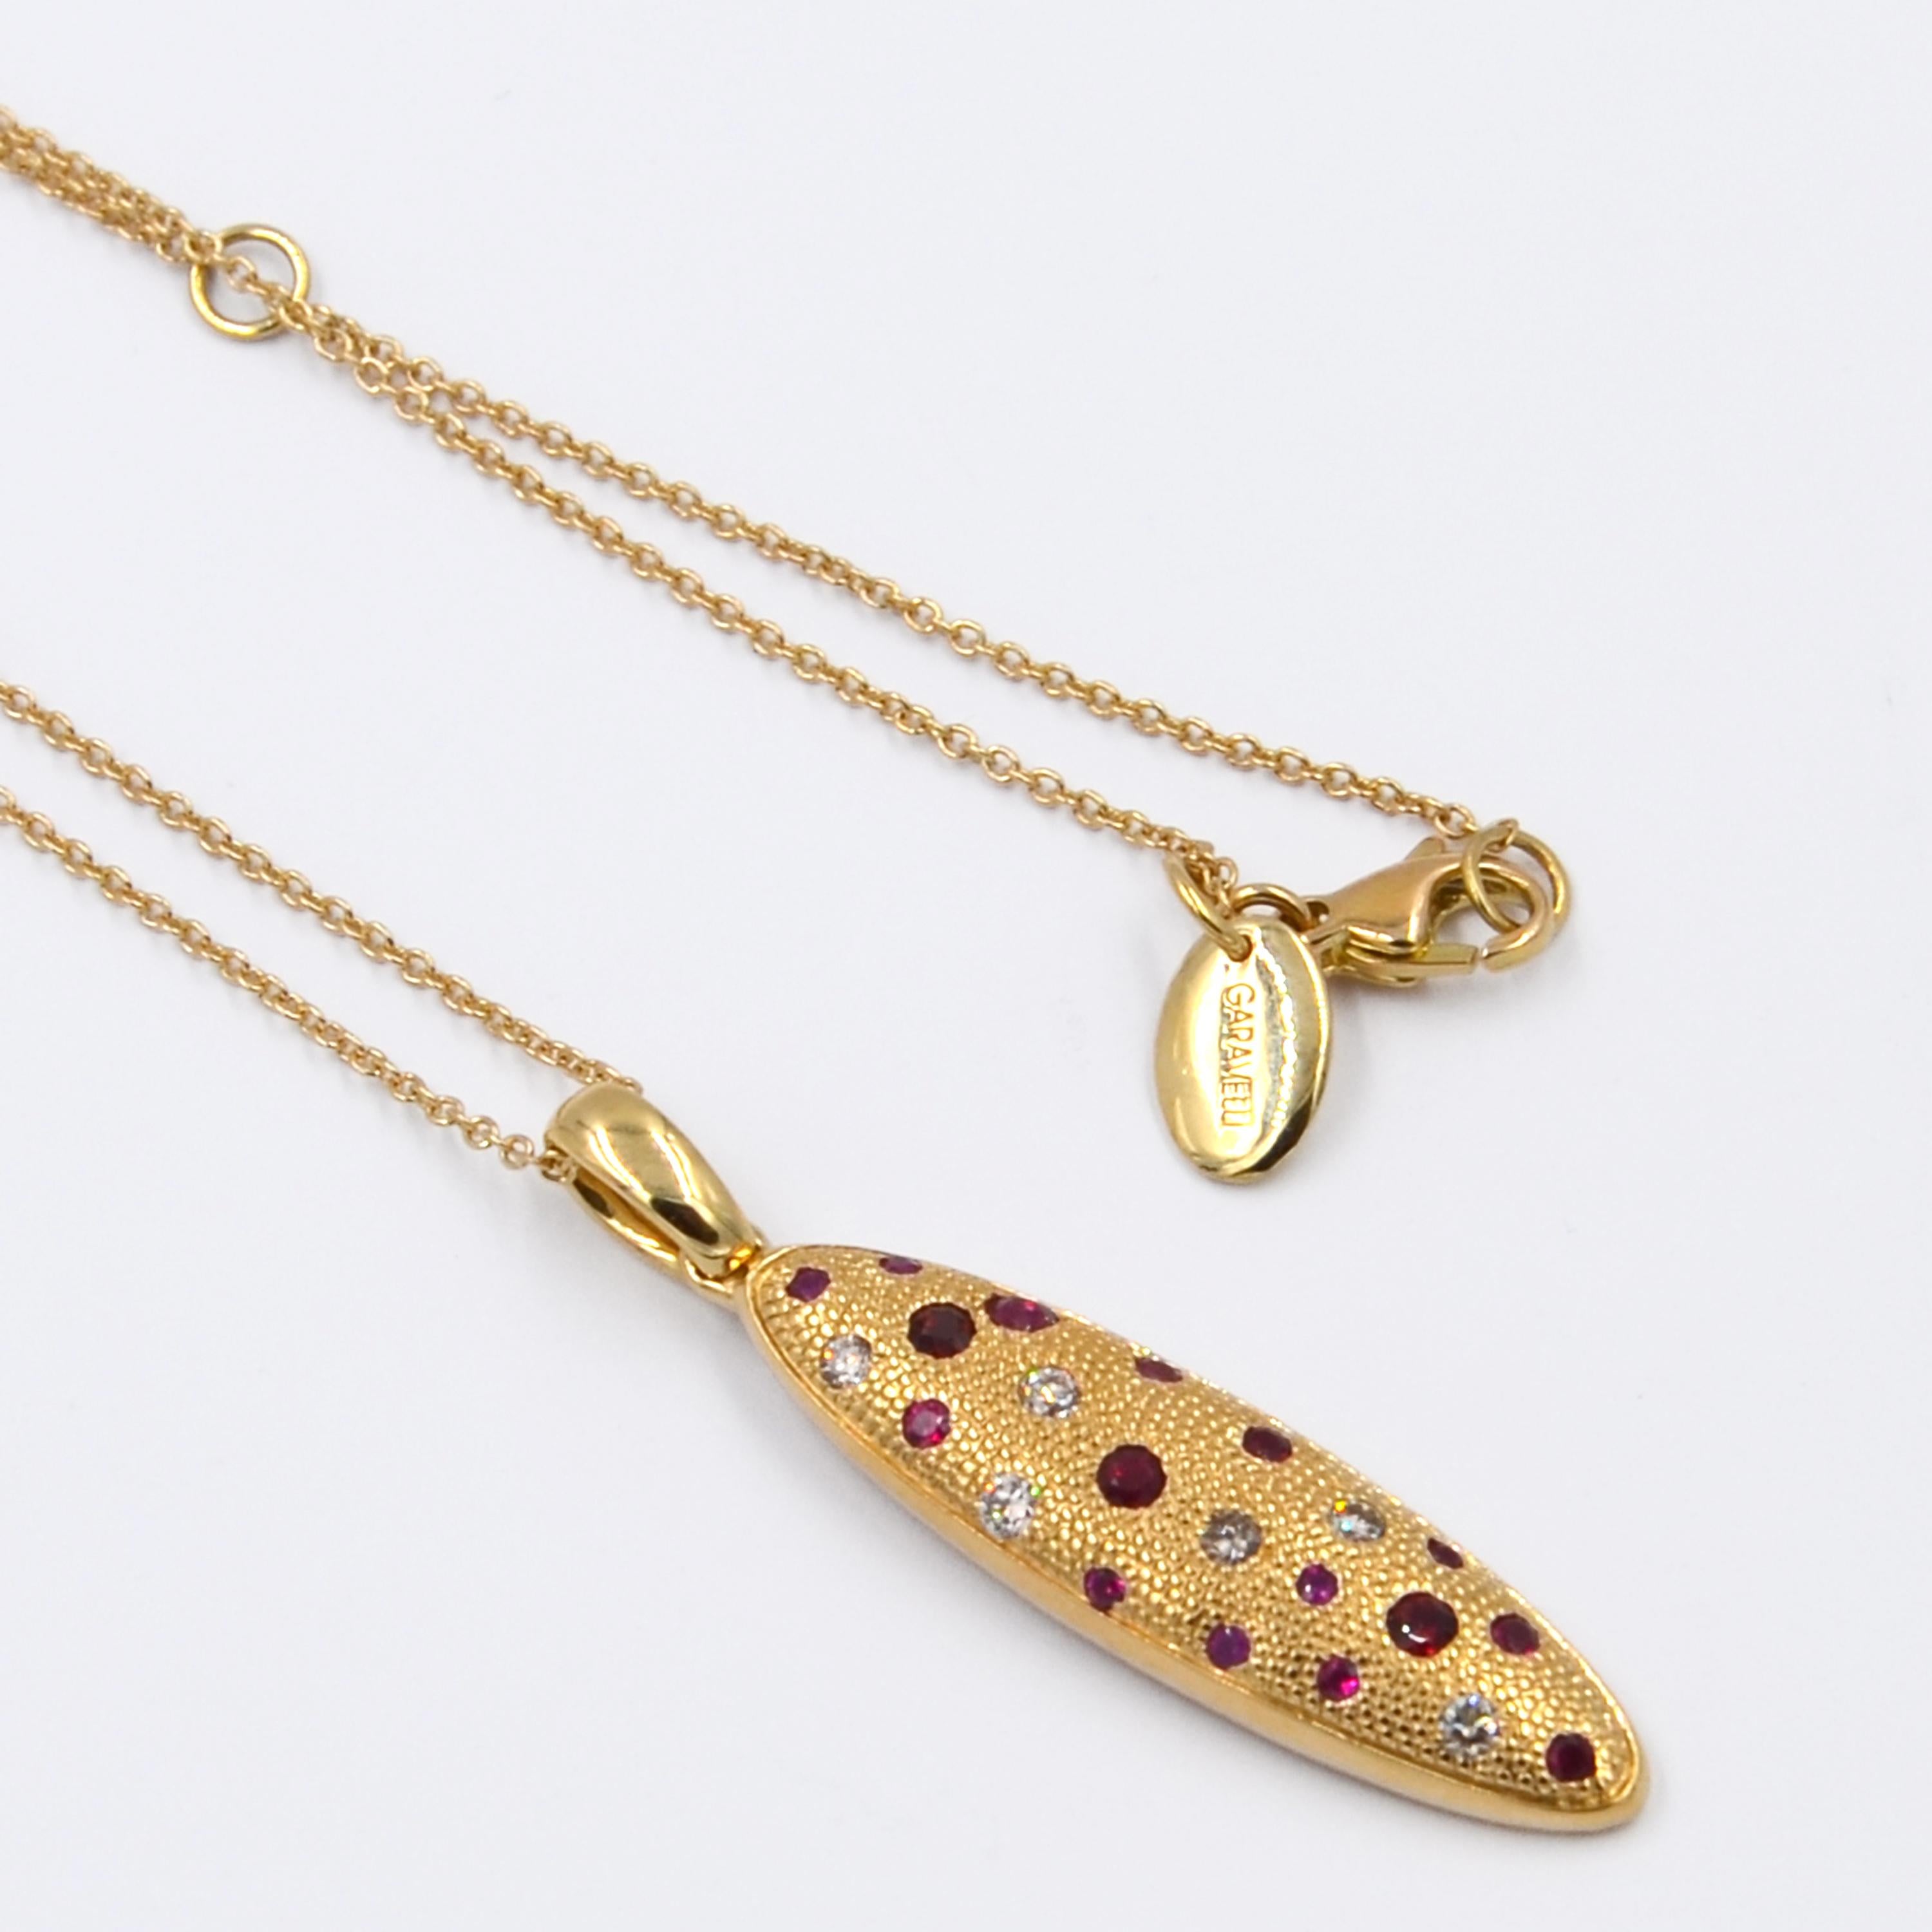 Contemporary 18 Karat Gold Rubies and Brown Diamonds Garavelli Matte Pendant with Chain